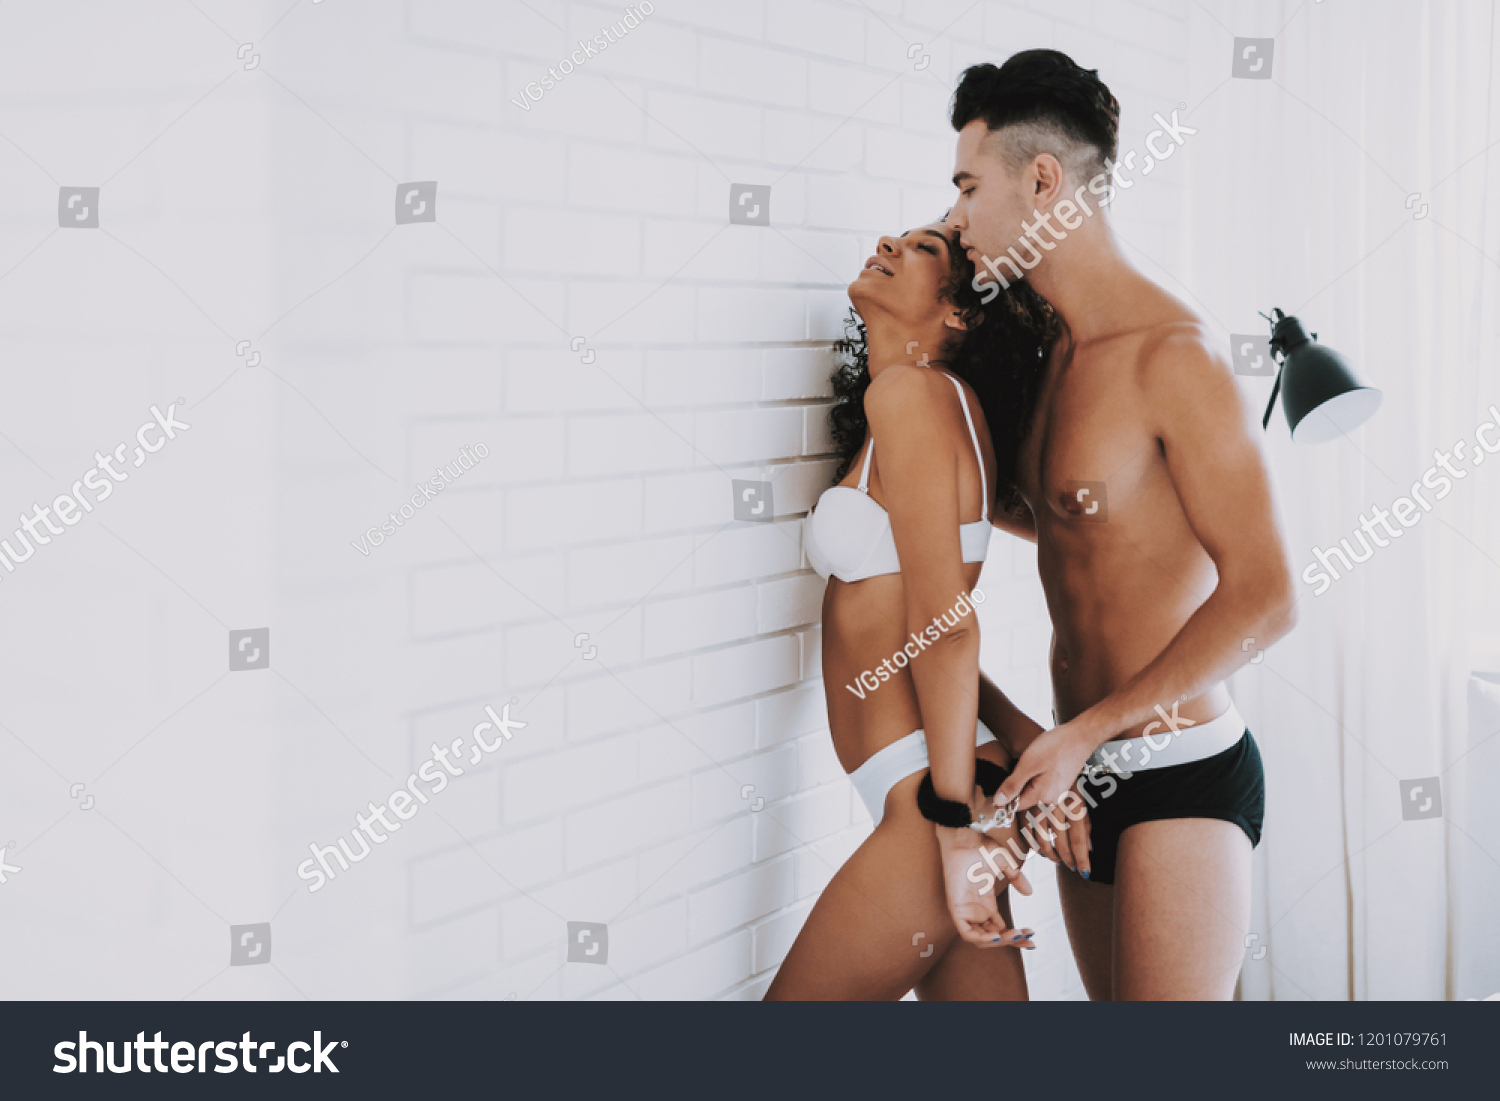 Young Attractive Lovers Using Handcuffs Bedroom Stock Photo 1201079761 |  Shutterstock